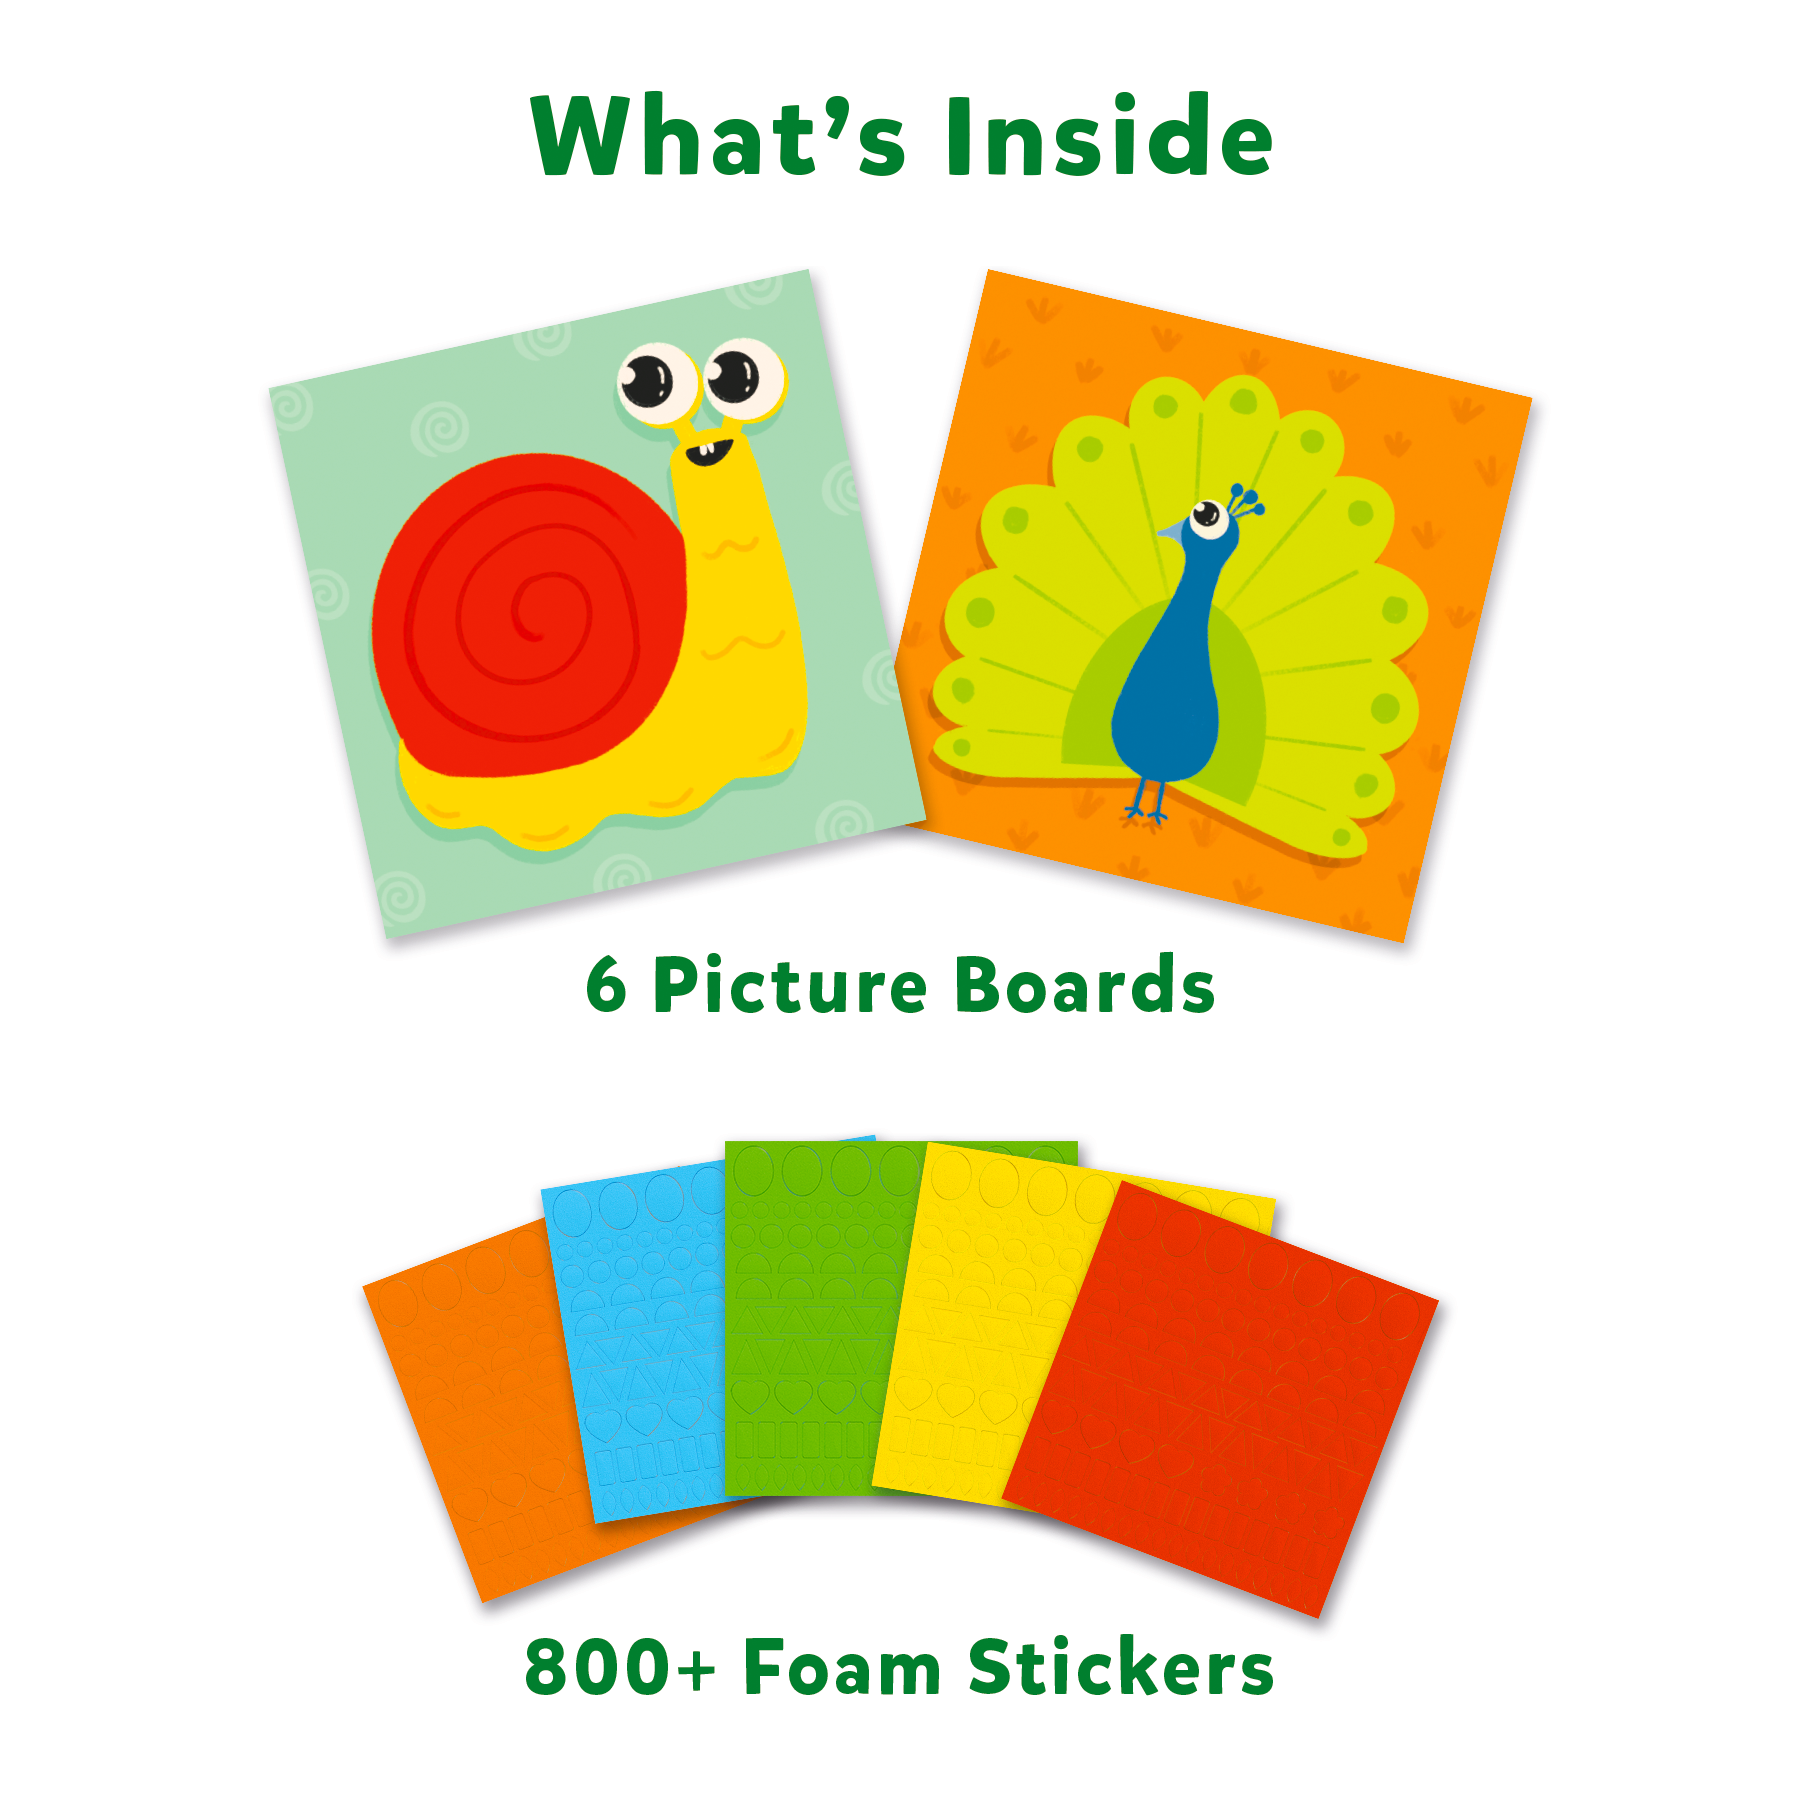 Skillmatics Art Activity - Fun With Foam, No Mess Sticker Art, 6 Creative Animal Themed Pictures, Gifts For Ages 3 To 7